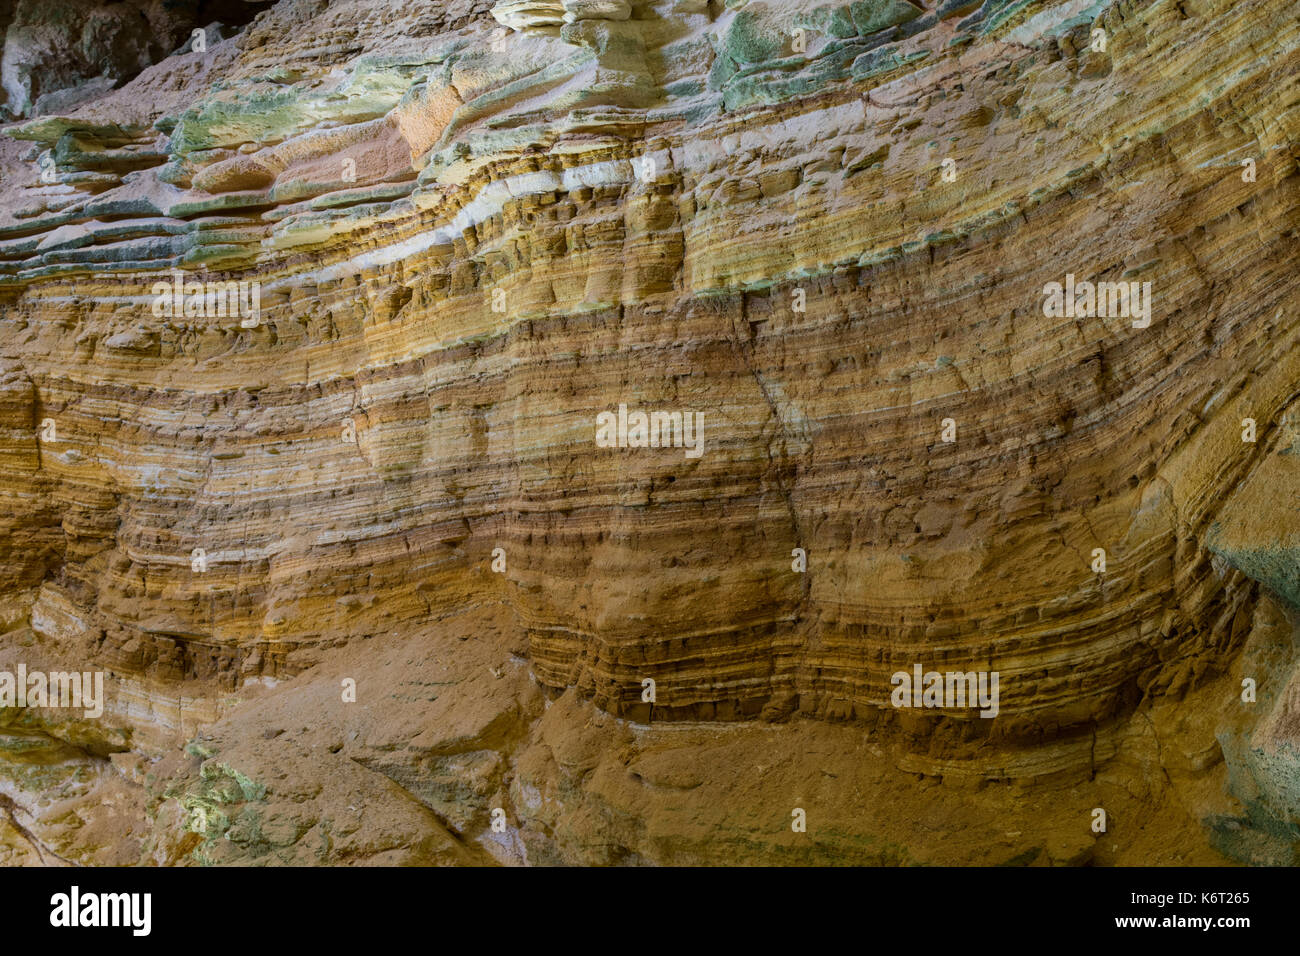 Cliff side cave, formed by sea erosion, containing evidence of sedimentation with different sediment layers having different colours. Cliffs in Malta Stock Photo